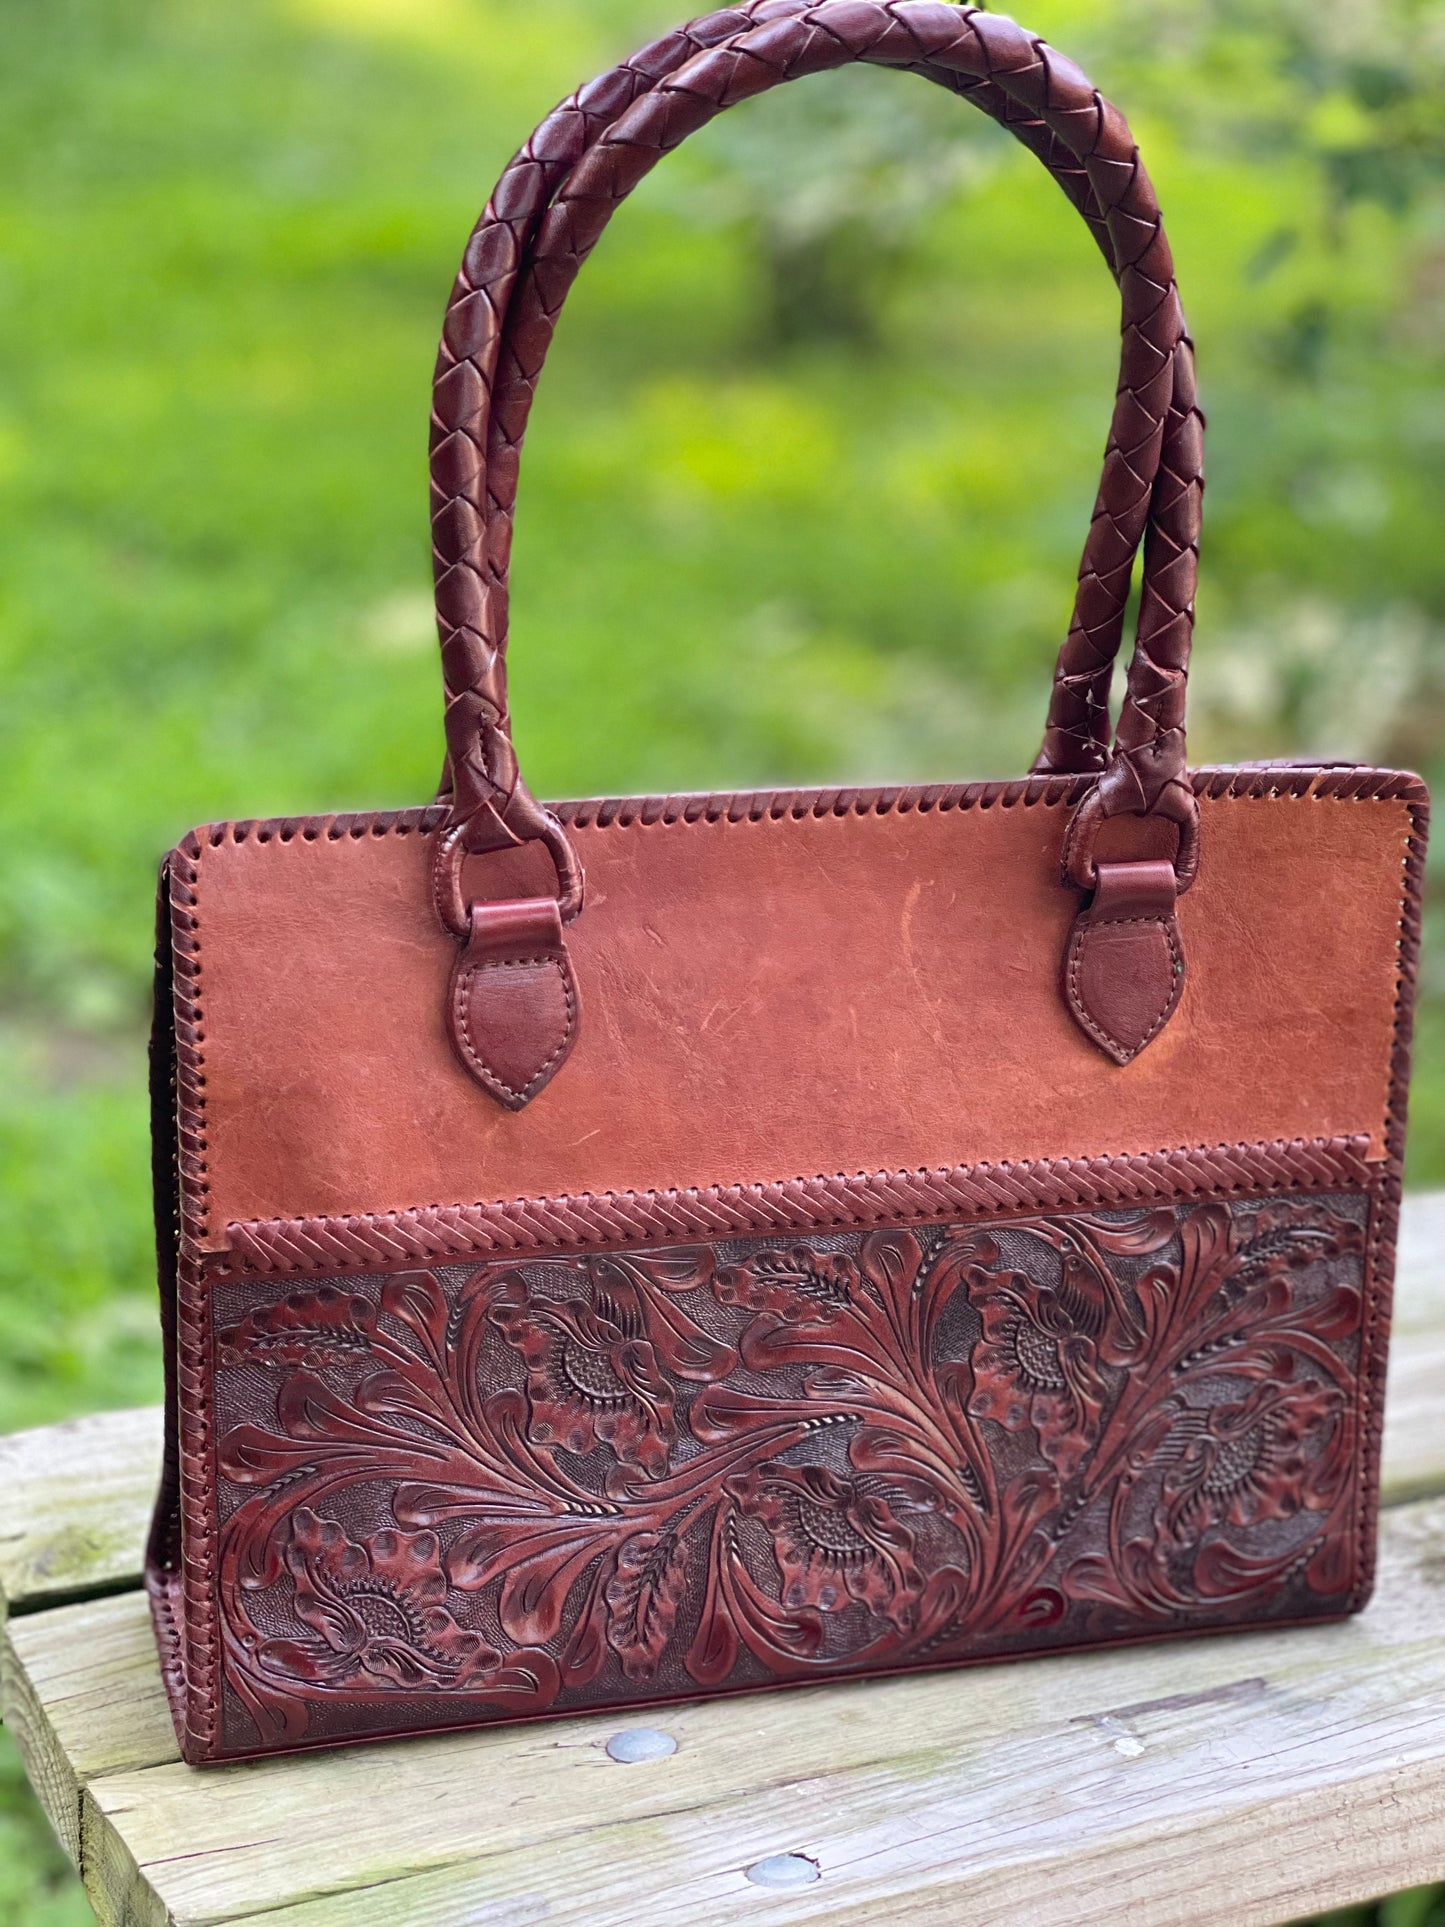 Hand Tooled Leather Tote, "MEDIA" by ALLE - ALLE Handbags